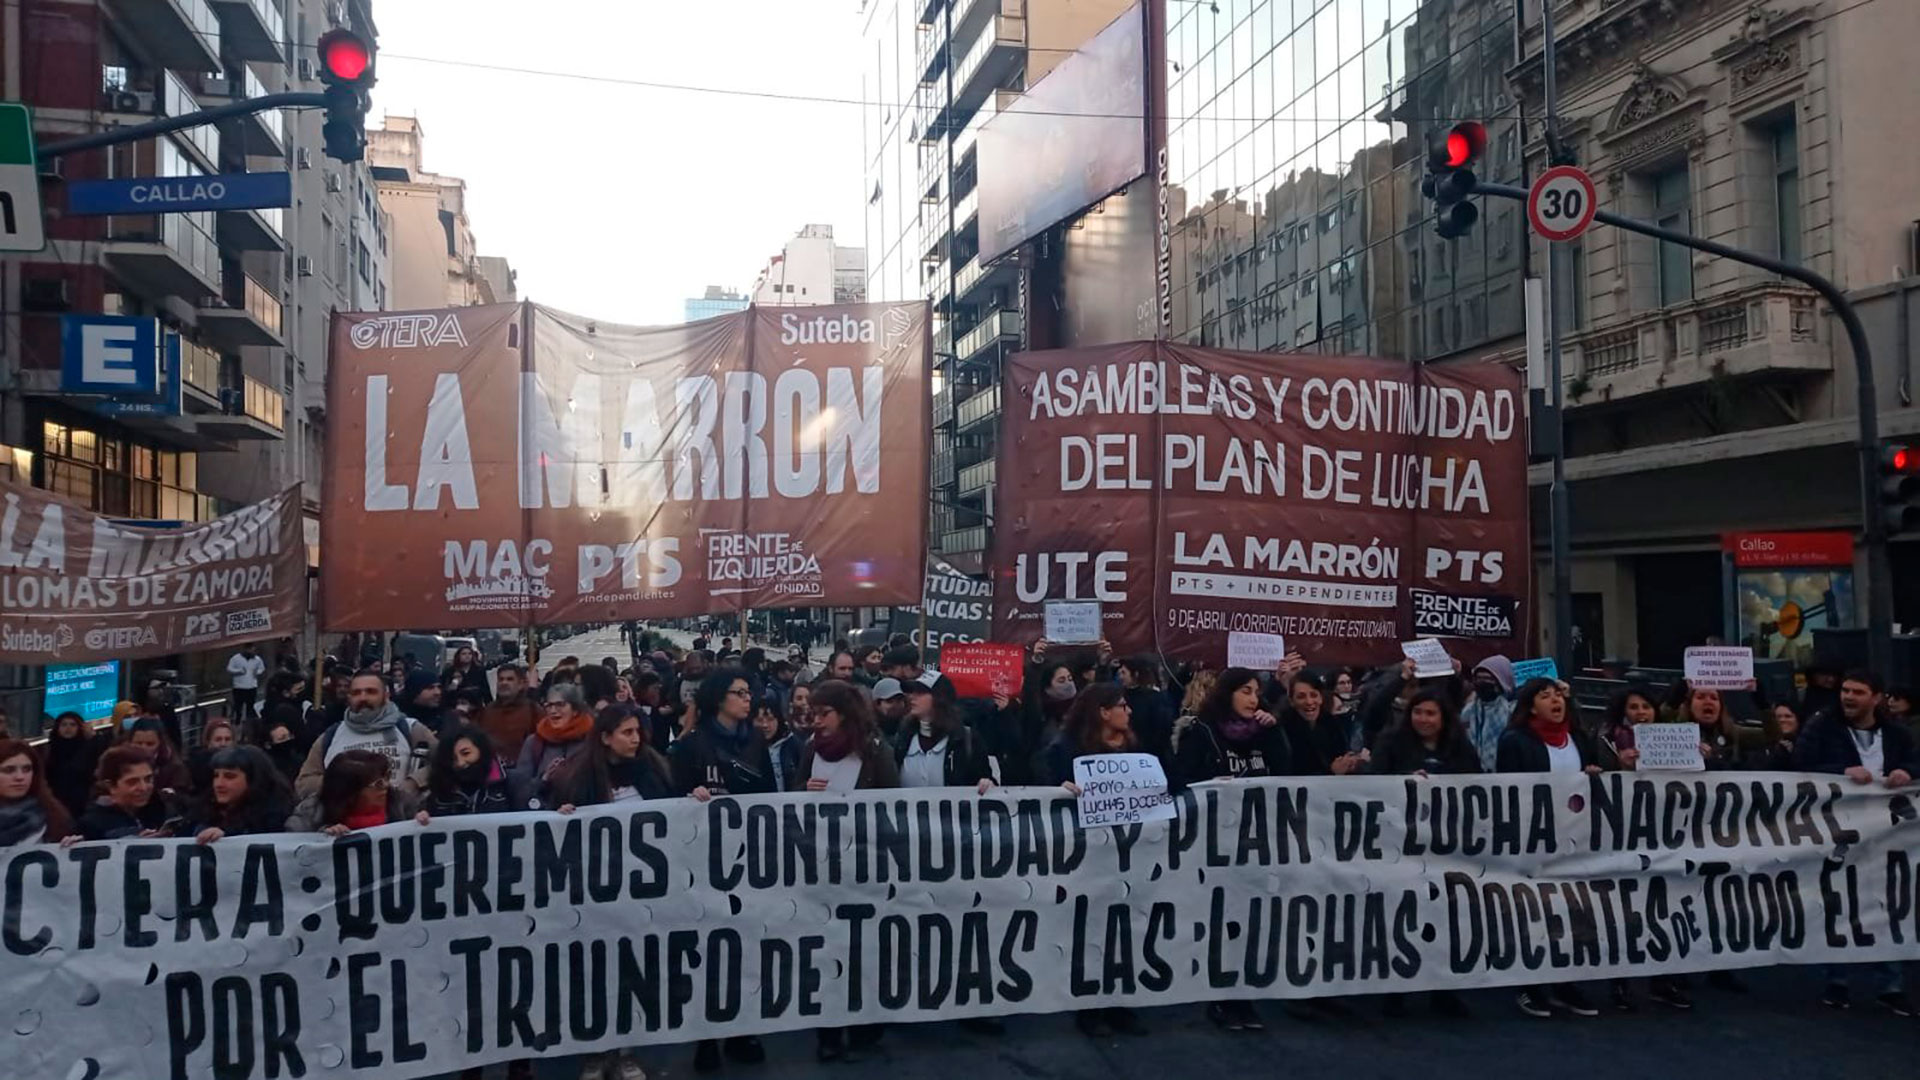 About 50 teachers cut traffic in Corrientes and Callao (@WalterVerst)